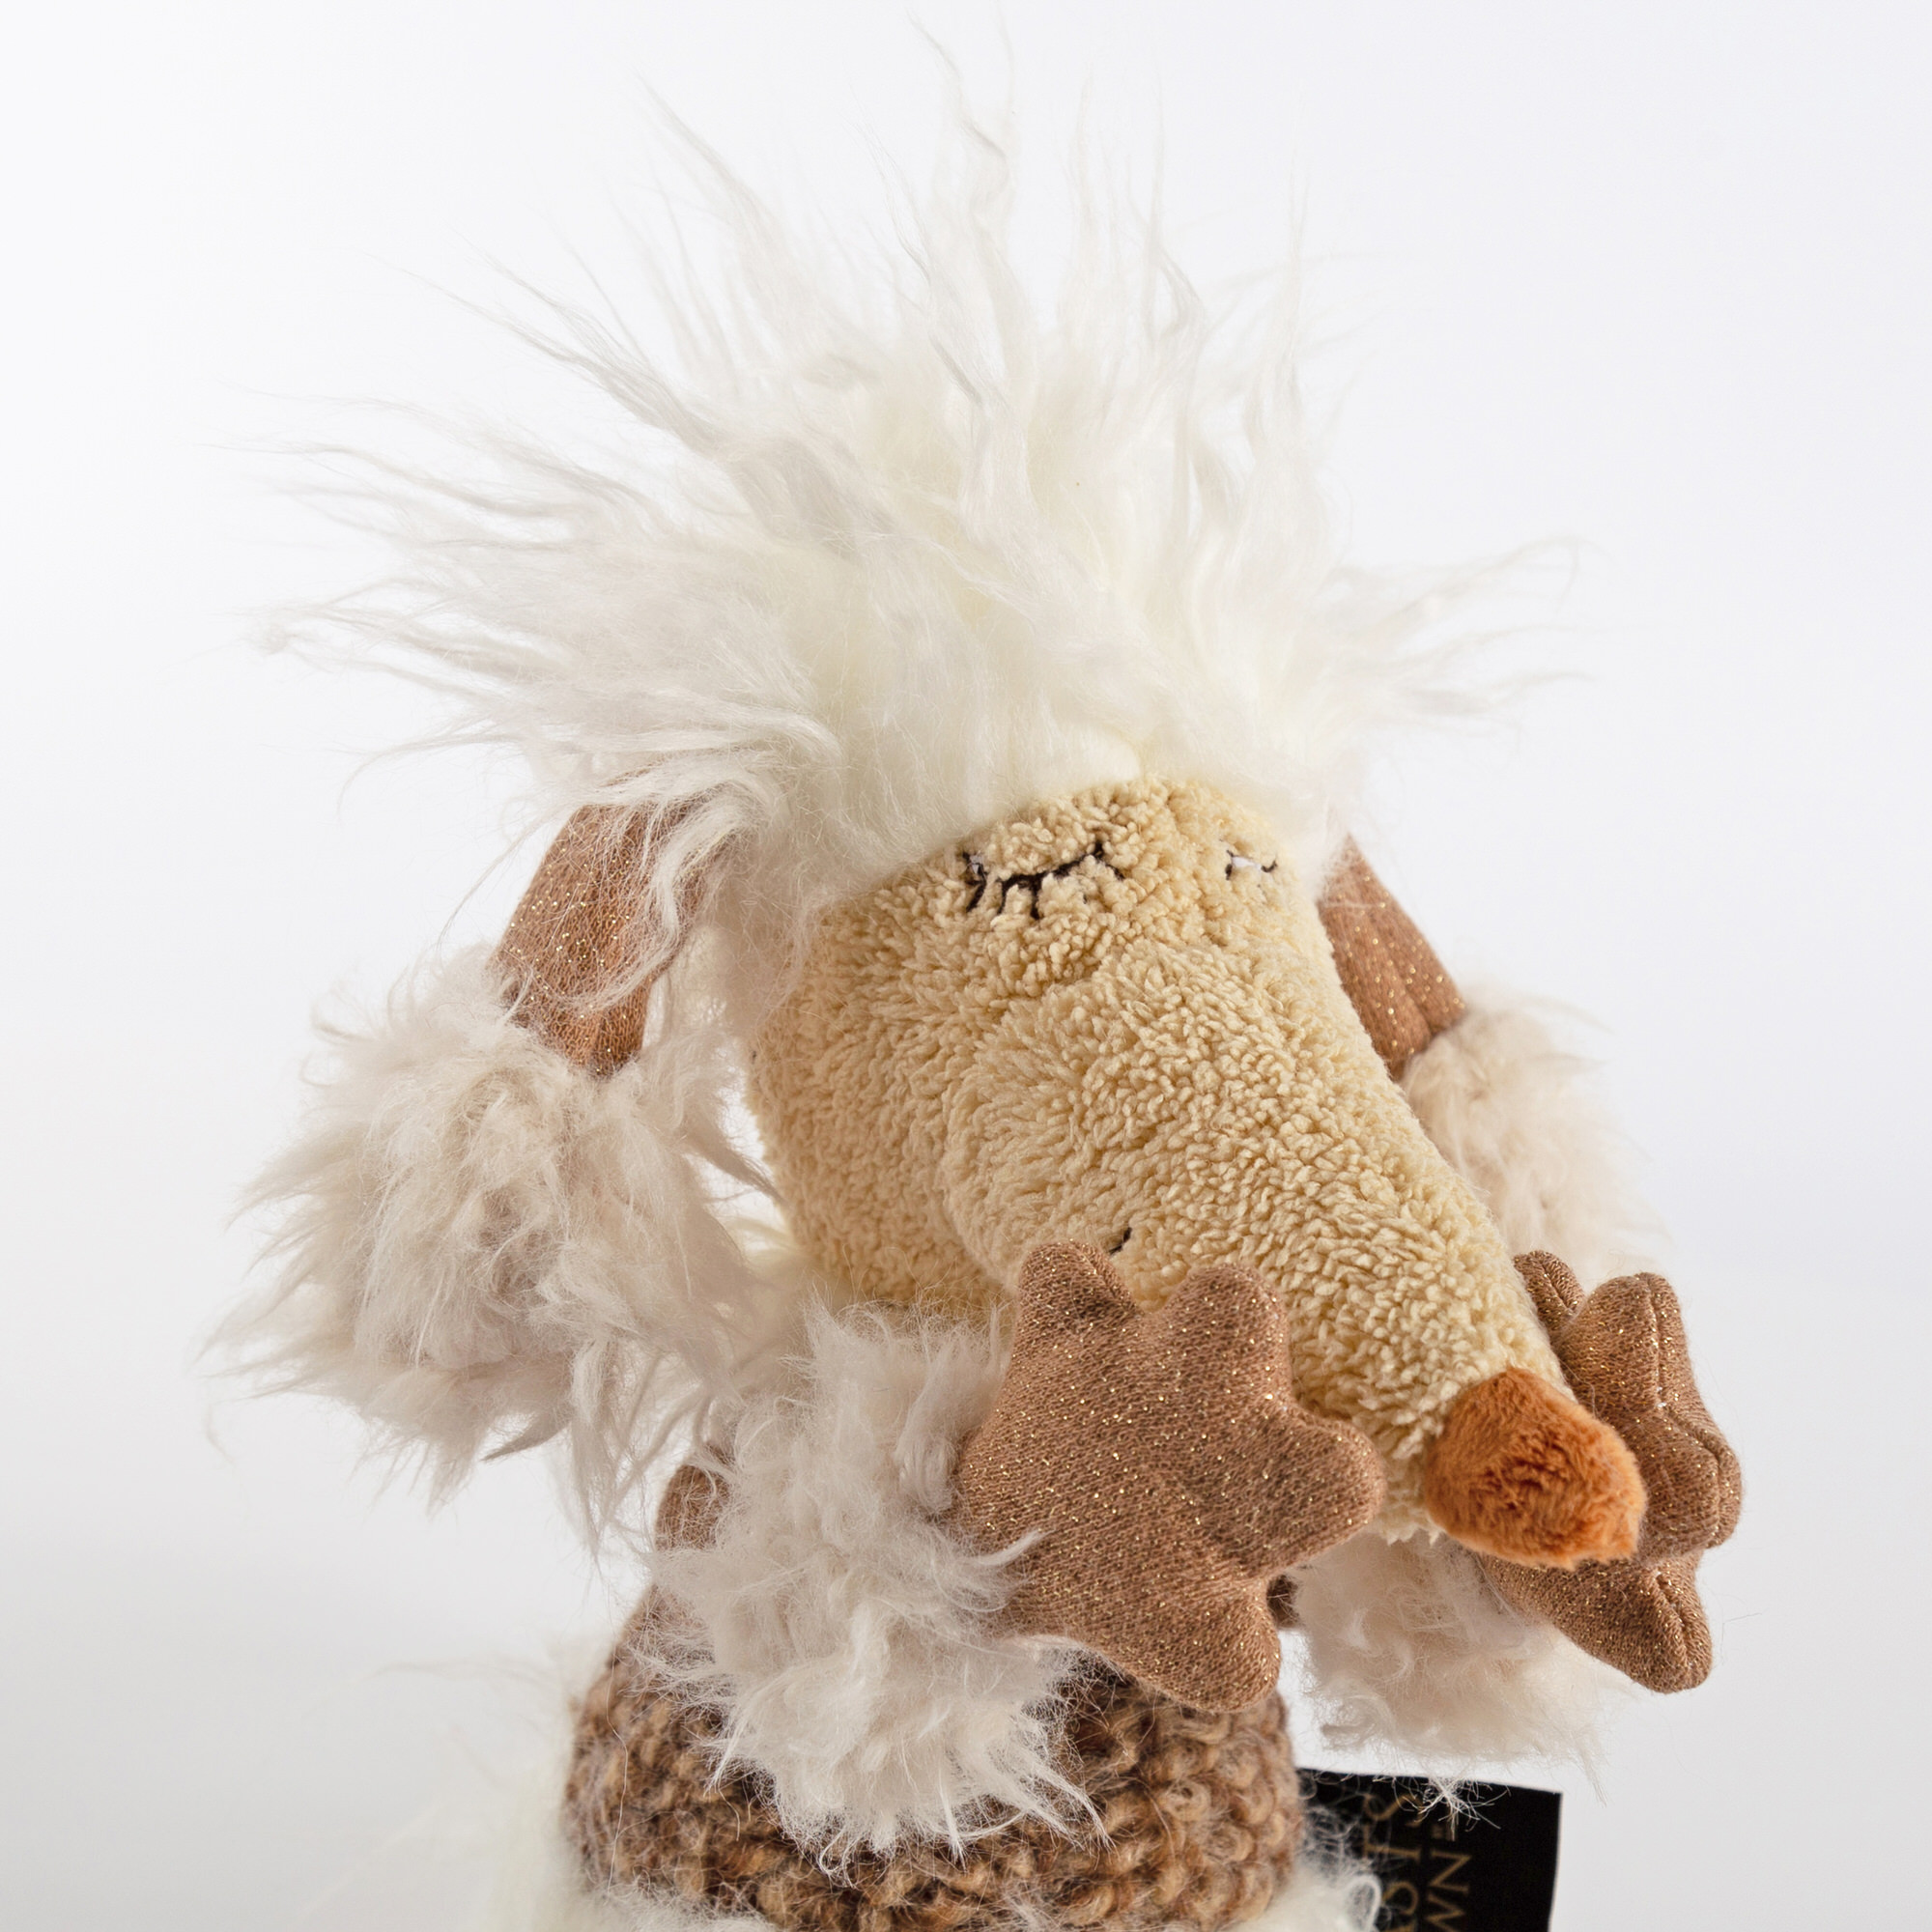 Plush poodle "Day Dreamer", Beasts